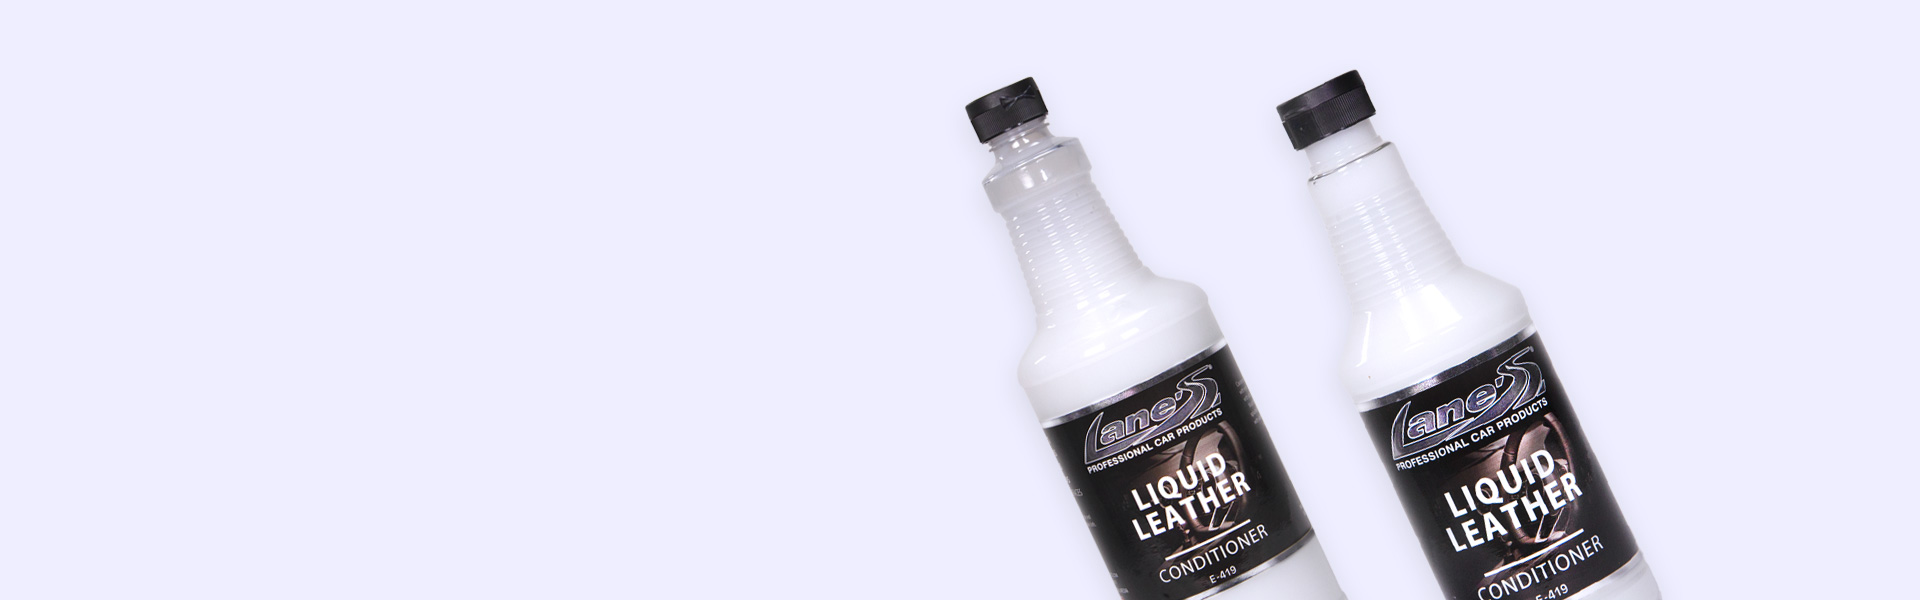 LANE'S Liquid Leather Conditioner- Car Leather Protection, Leather  Conditioner- Softens Leather, Revives Flexibility, Prevents Fading and  Cracking